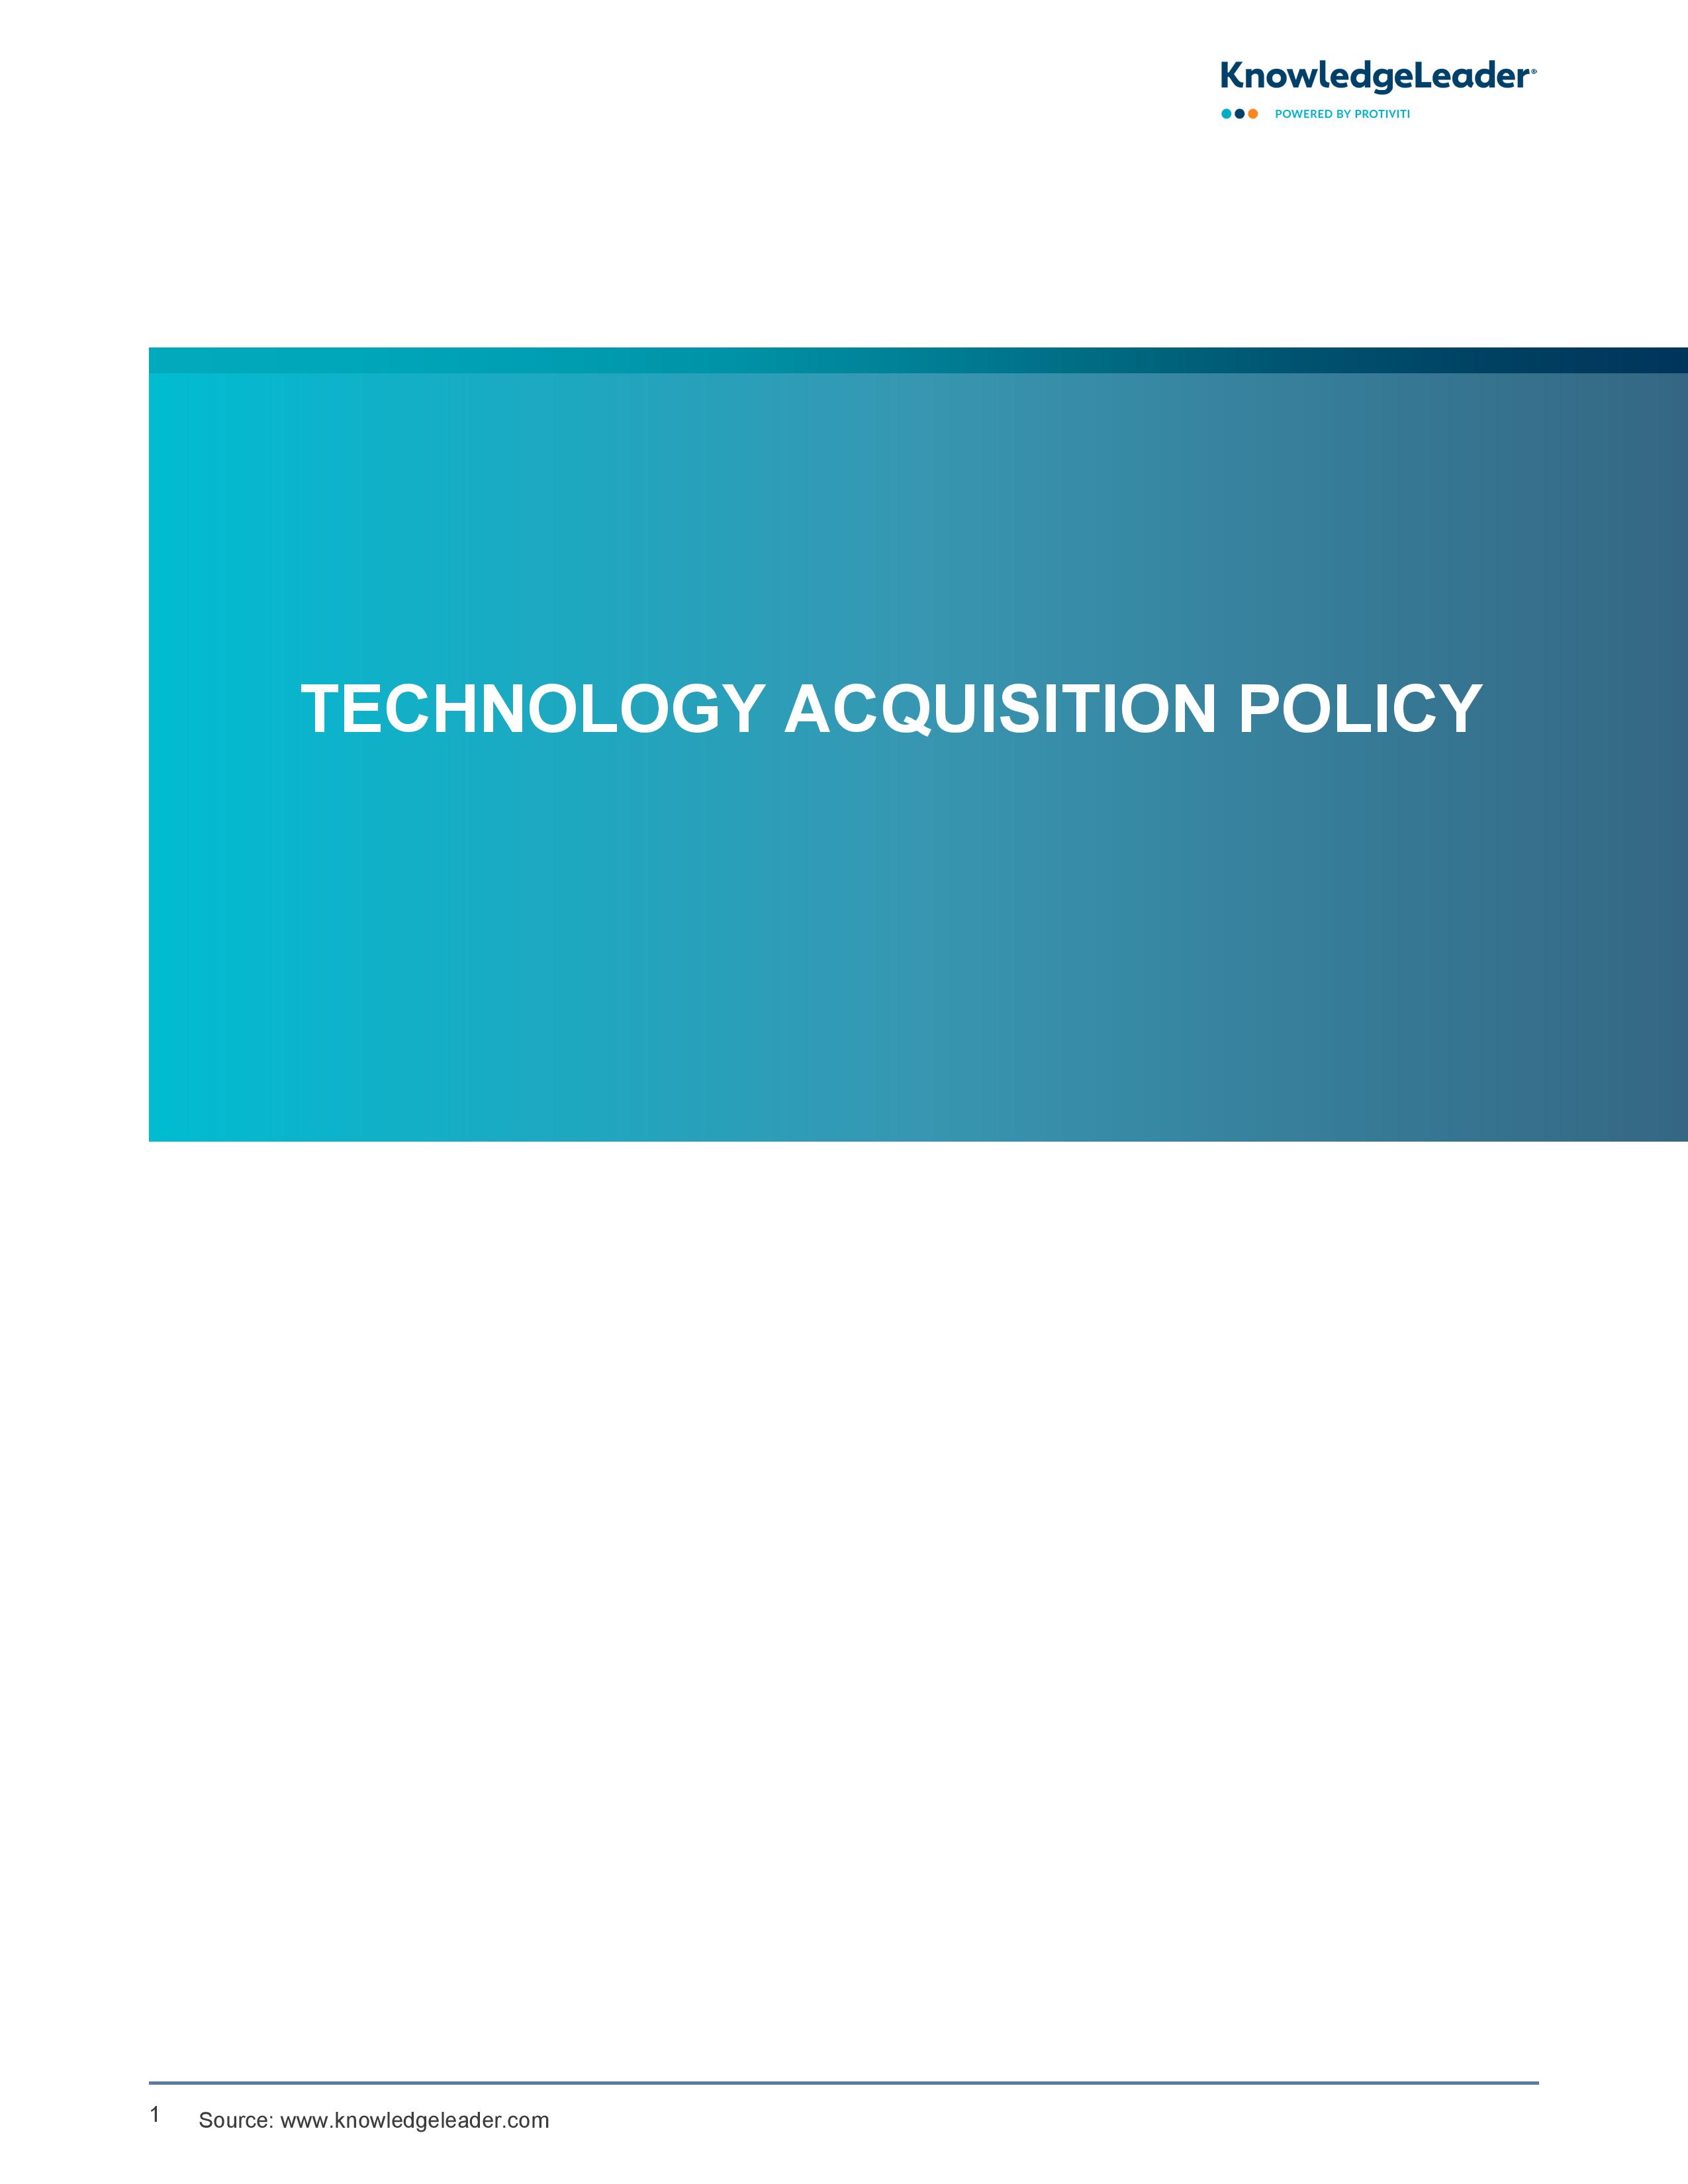 screenshot of the first page of Technology Acquisition Policy